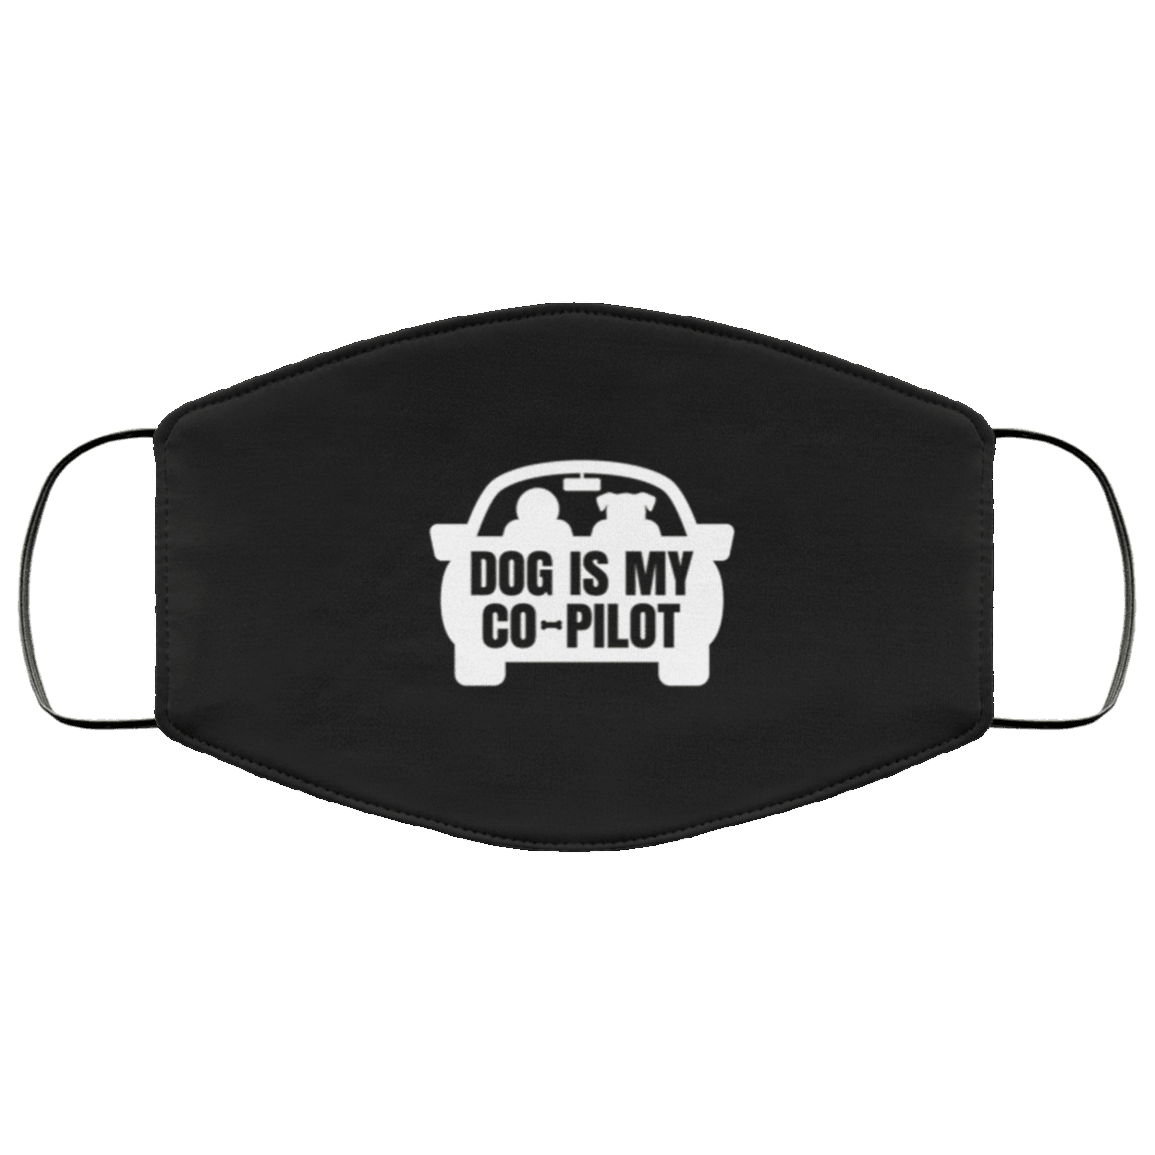 Designs by MyUtopia Shout Out:Dog Is My Co-Pilot Humor Adult Fabric Face Mask with Elastic Ear Loops,3 Layer Fabric Face Mask / Black / Adult,Fabric Face Mask